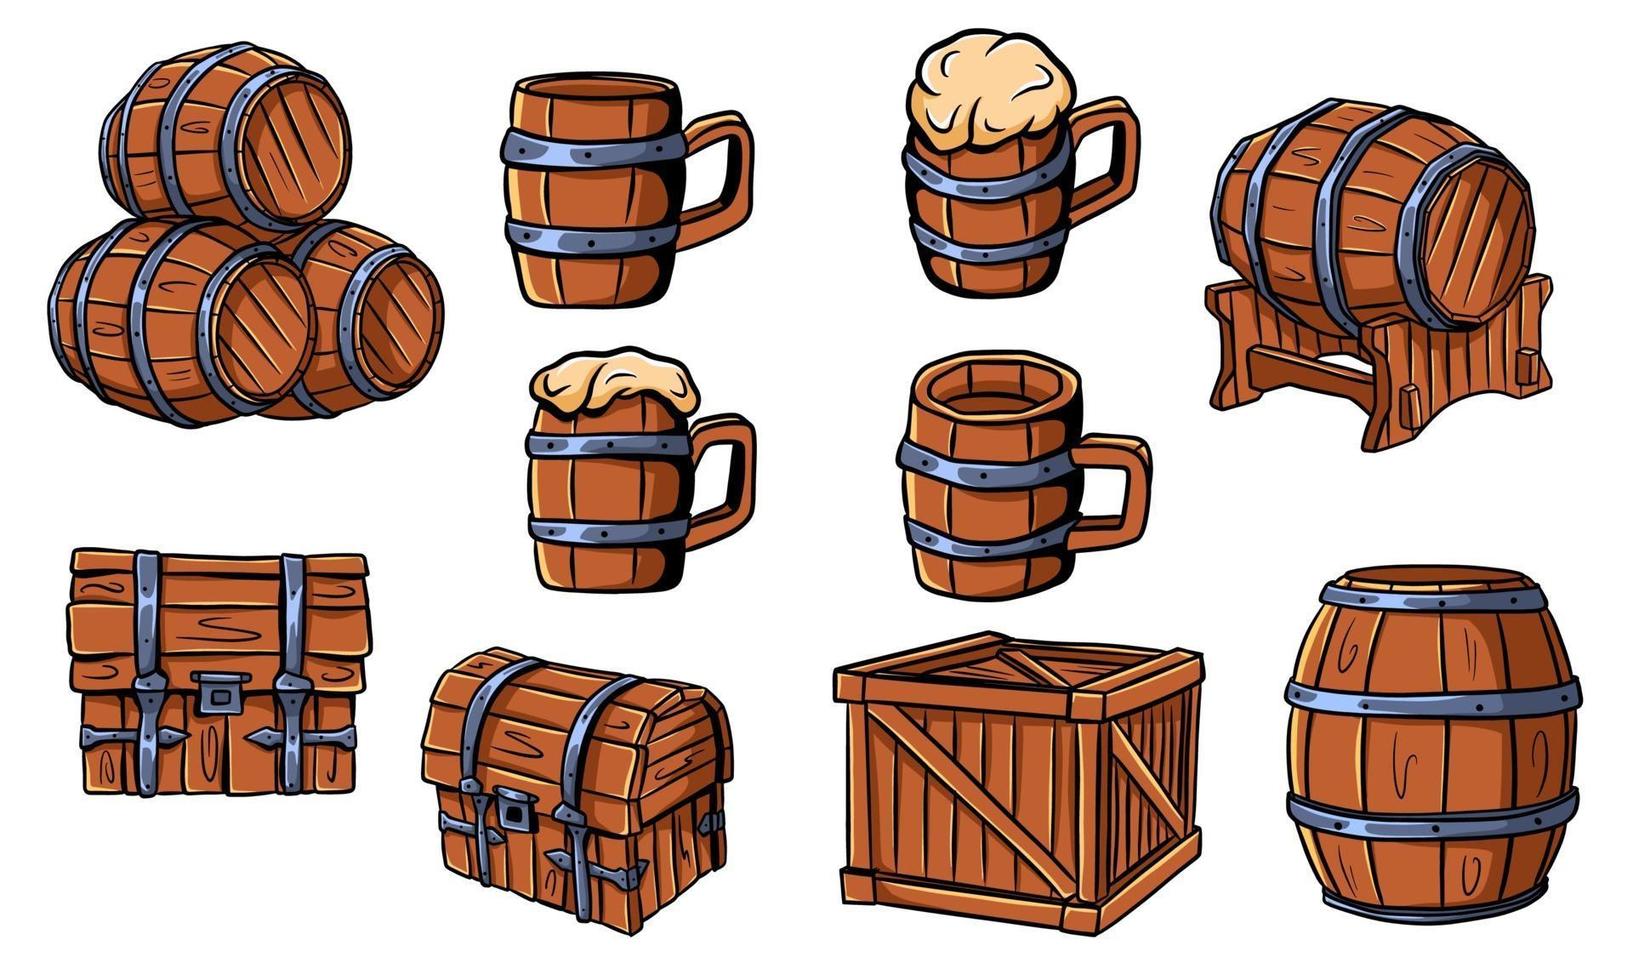 Wooden barrels, chests, beer or ale mugs. Wooden crafts. Box. Barrels for wine. Vector illustration isolated.